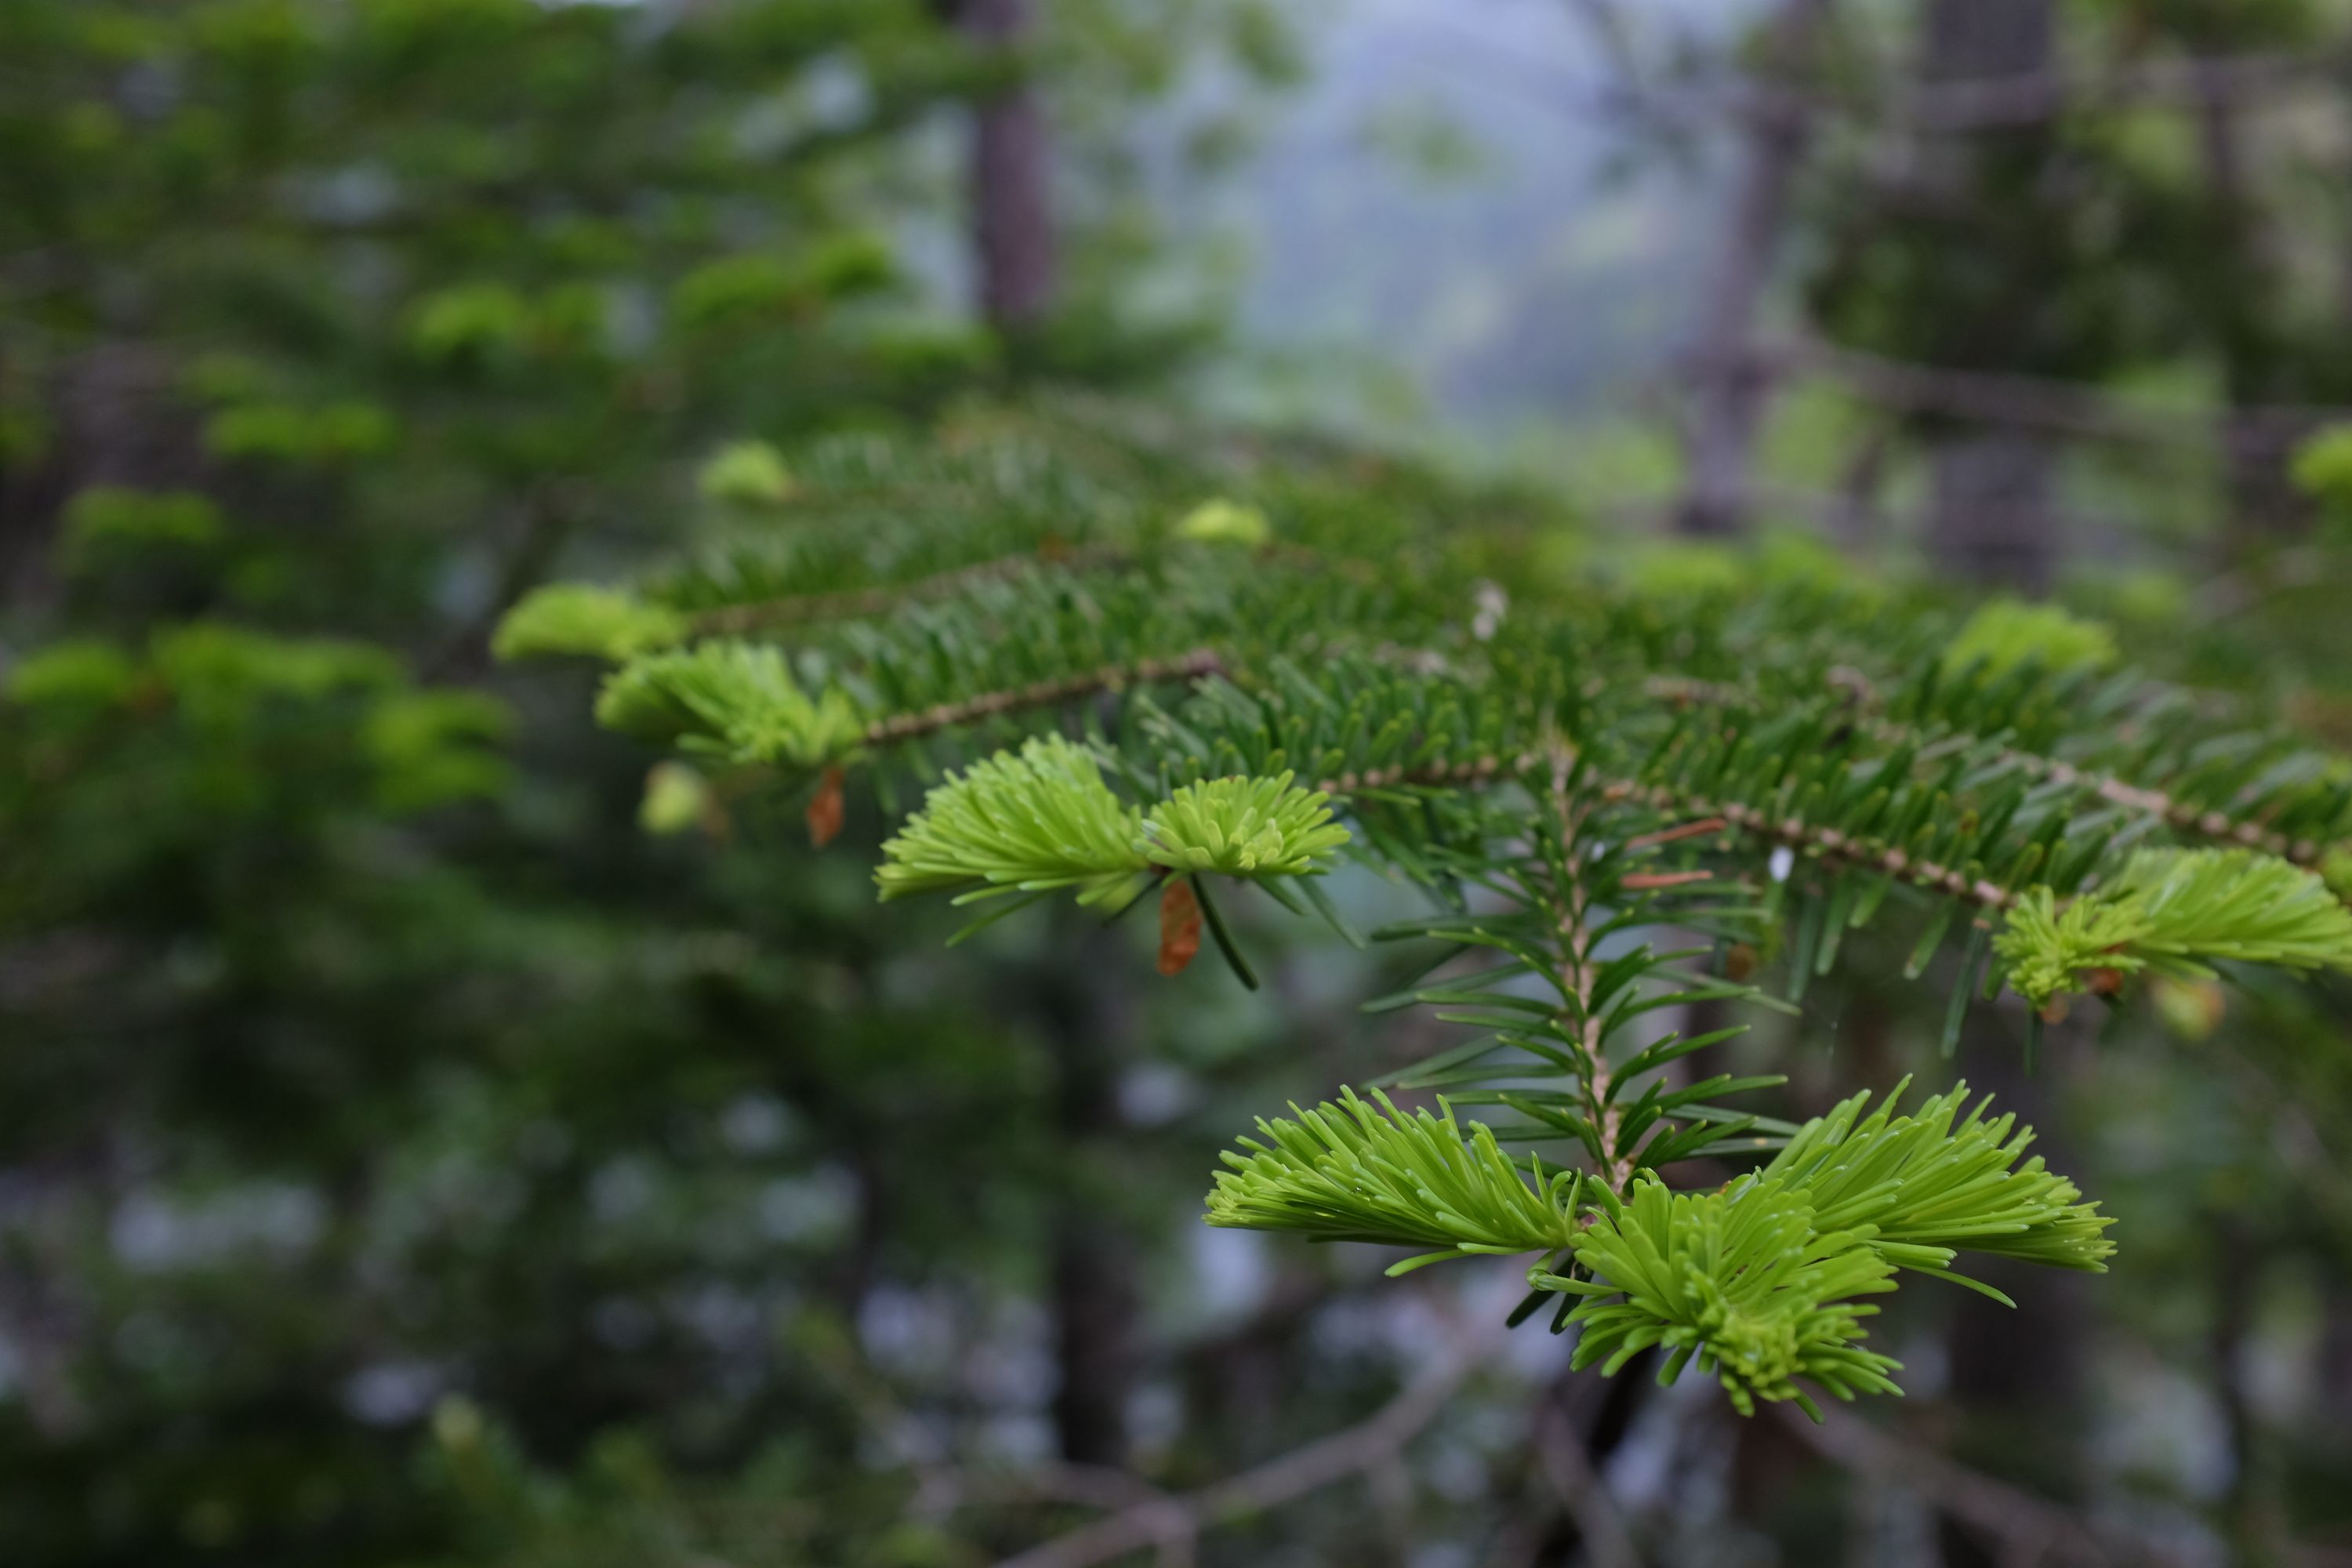 Closeup of the fresh shoots of a spruce tree.